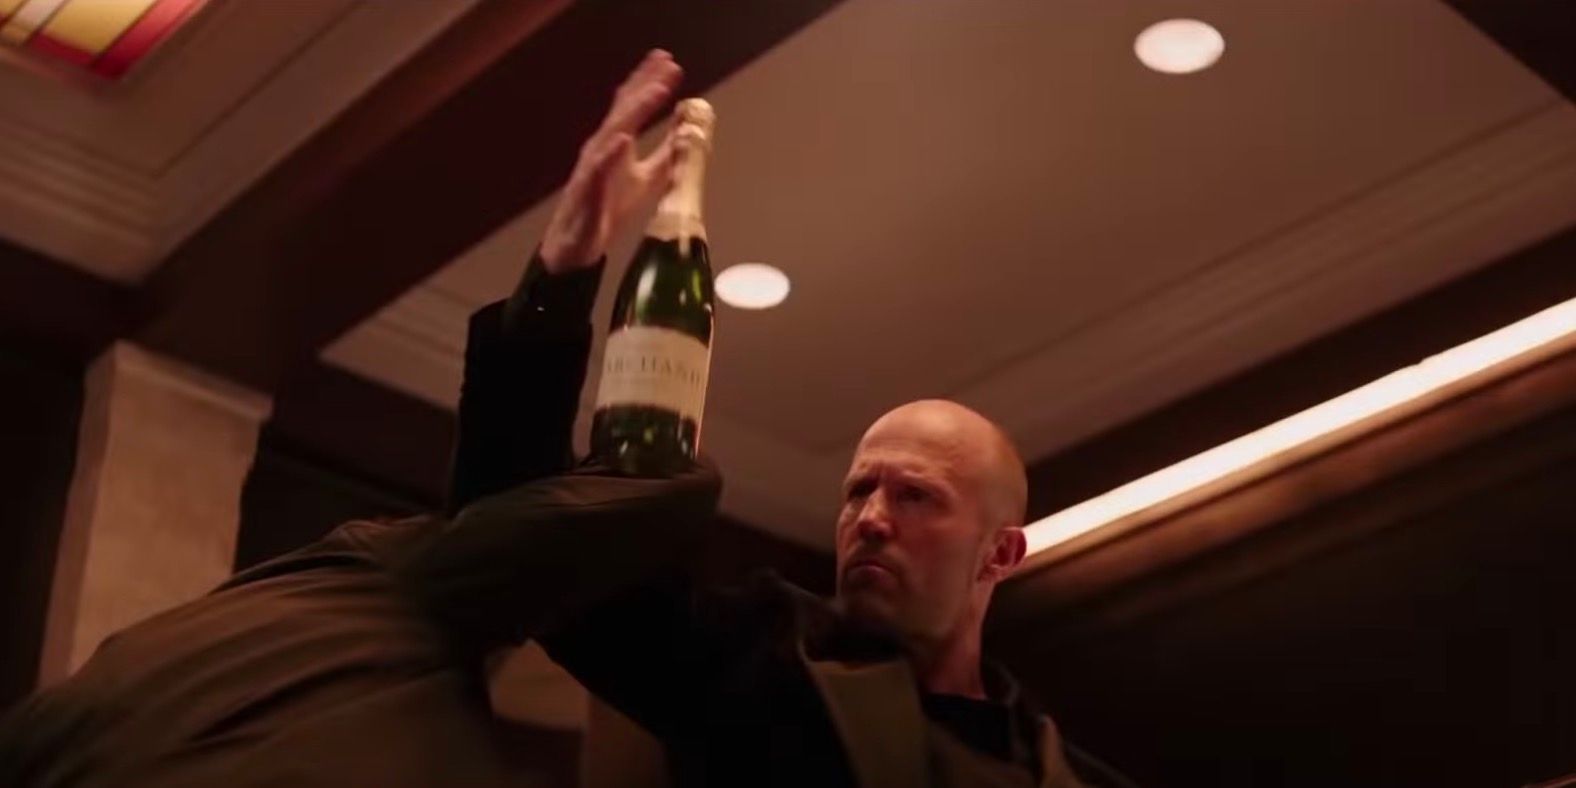 Shaw fighting with a champagne bottle in Hobbs and Shaw